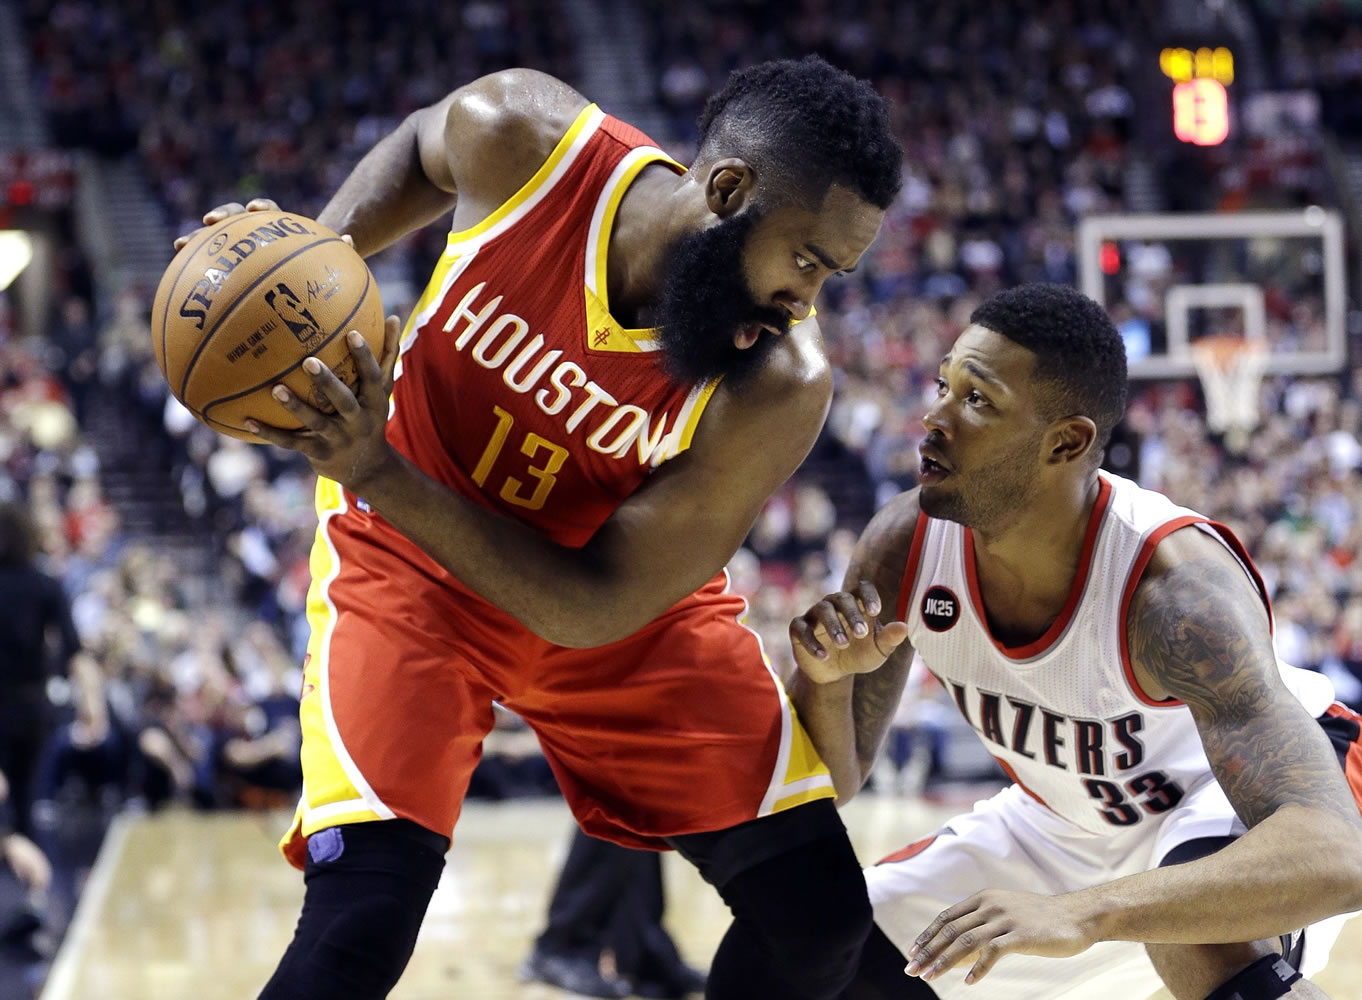 don ryan/Associated Press
Portland's Alonzo Gee, right, plays tight defense against Houston Rockets guard James Harden.